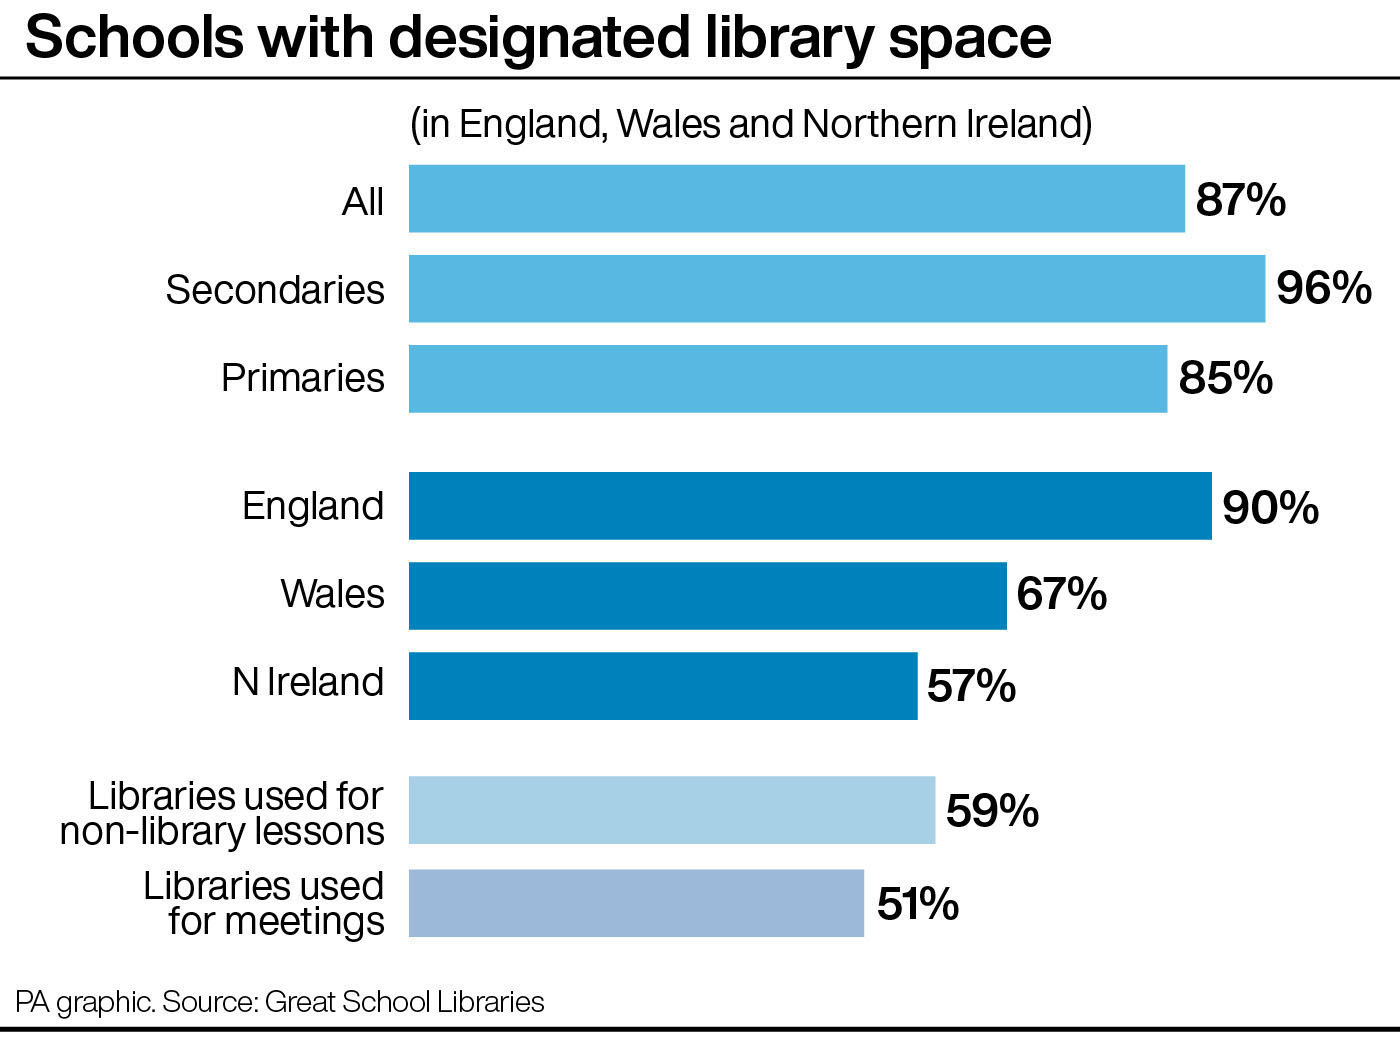 Schools with designated library space